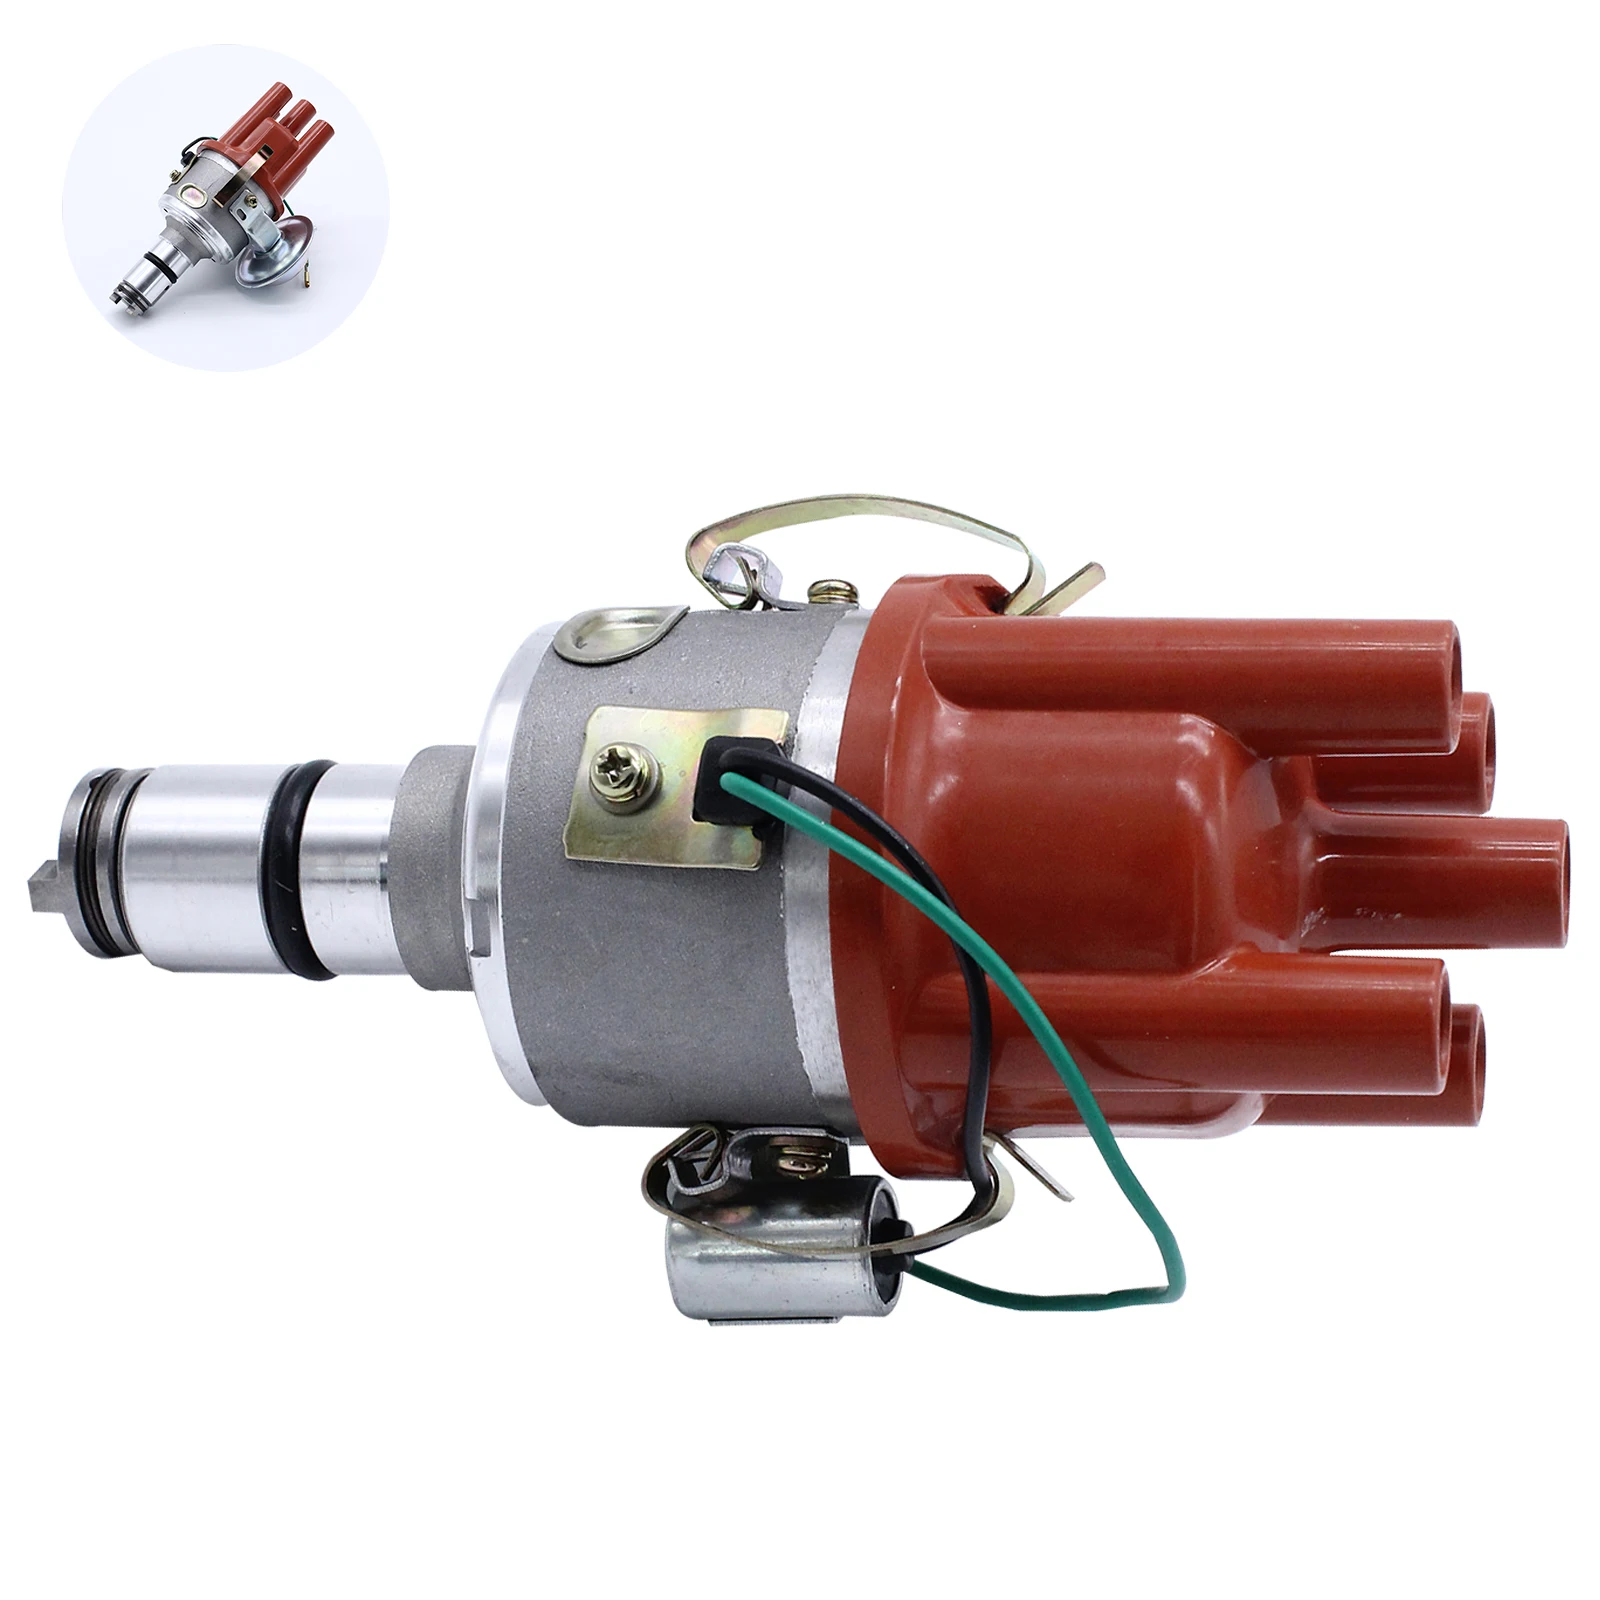 2021 brand new hot sale 043905205n 023117602b for volkswagen volkswagen beetle bug audi auto parts ignition distributor parts free global shipping